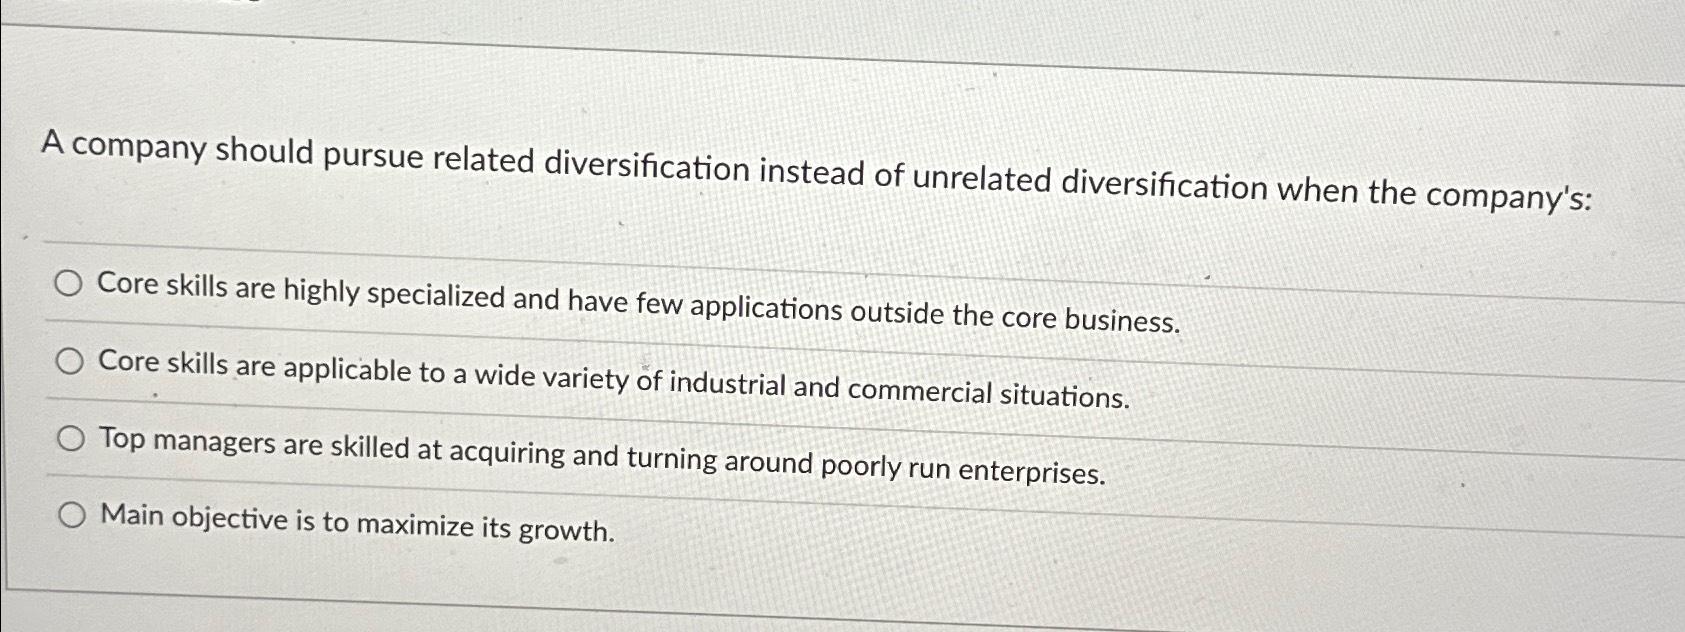 A company should pursue related diversification instead of unrelated diversification when the company's: Core